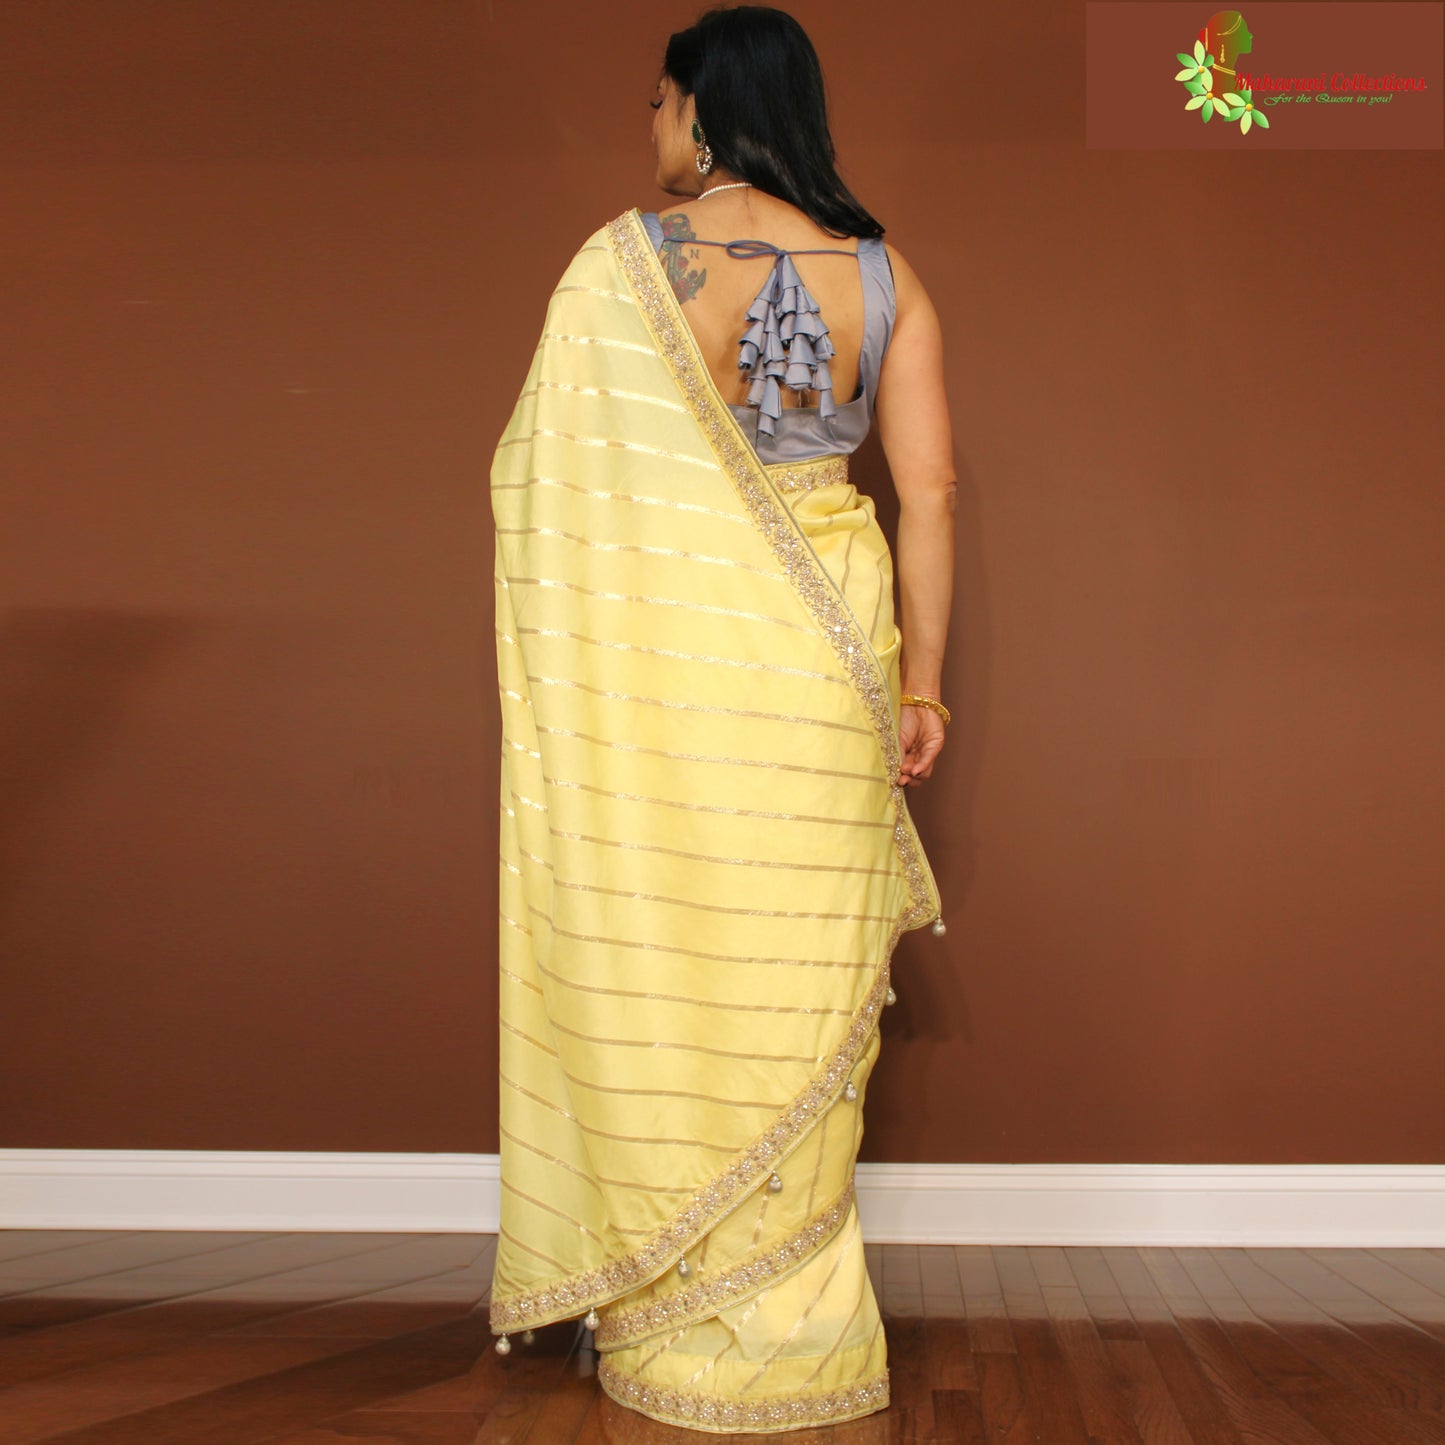 Maharani's Party Wear Georgette Lahariya Saree - Lemon Yellow (Includes Stitched Blouse and Petticoat)